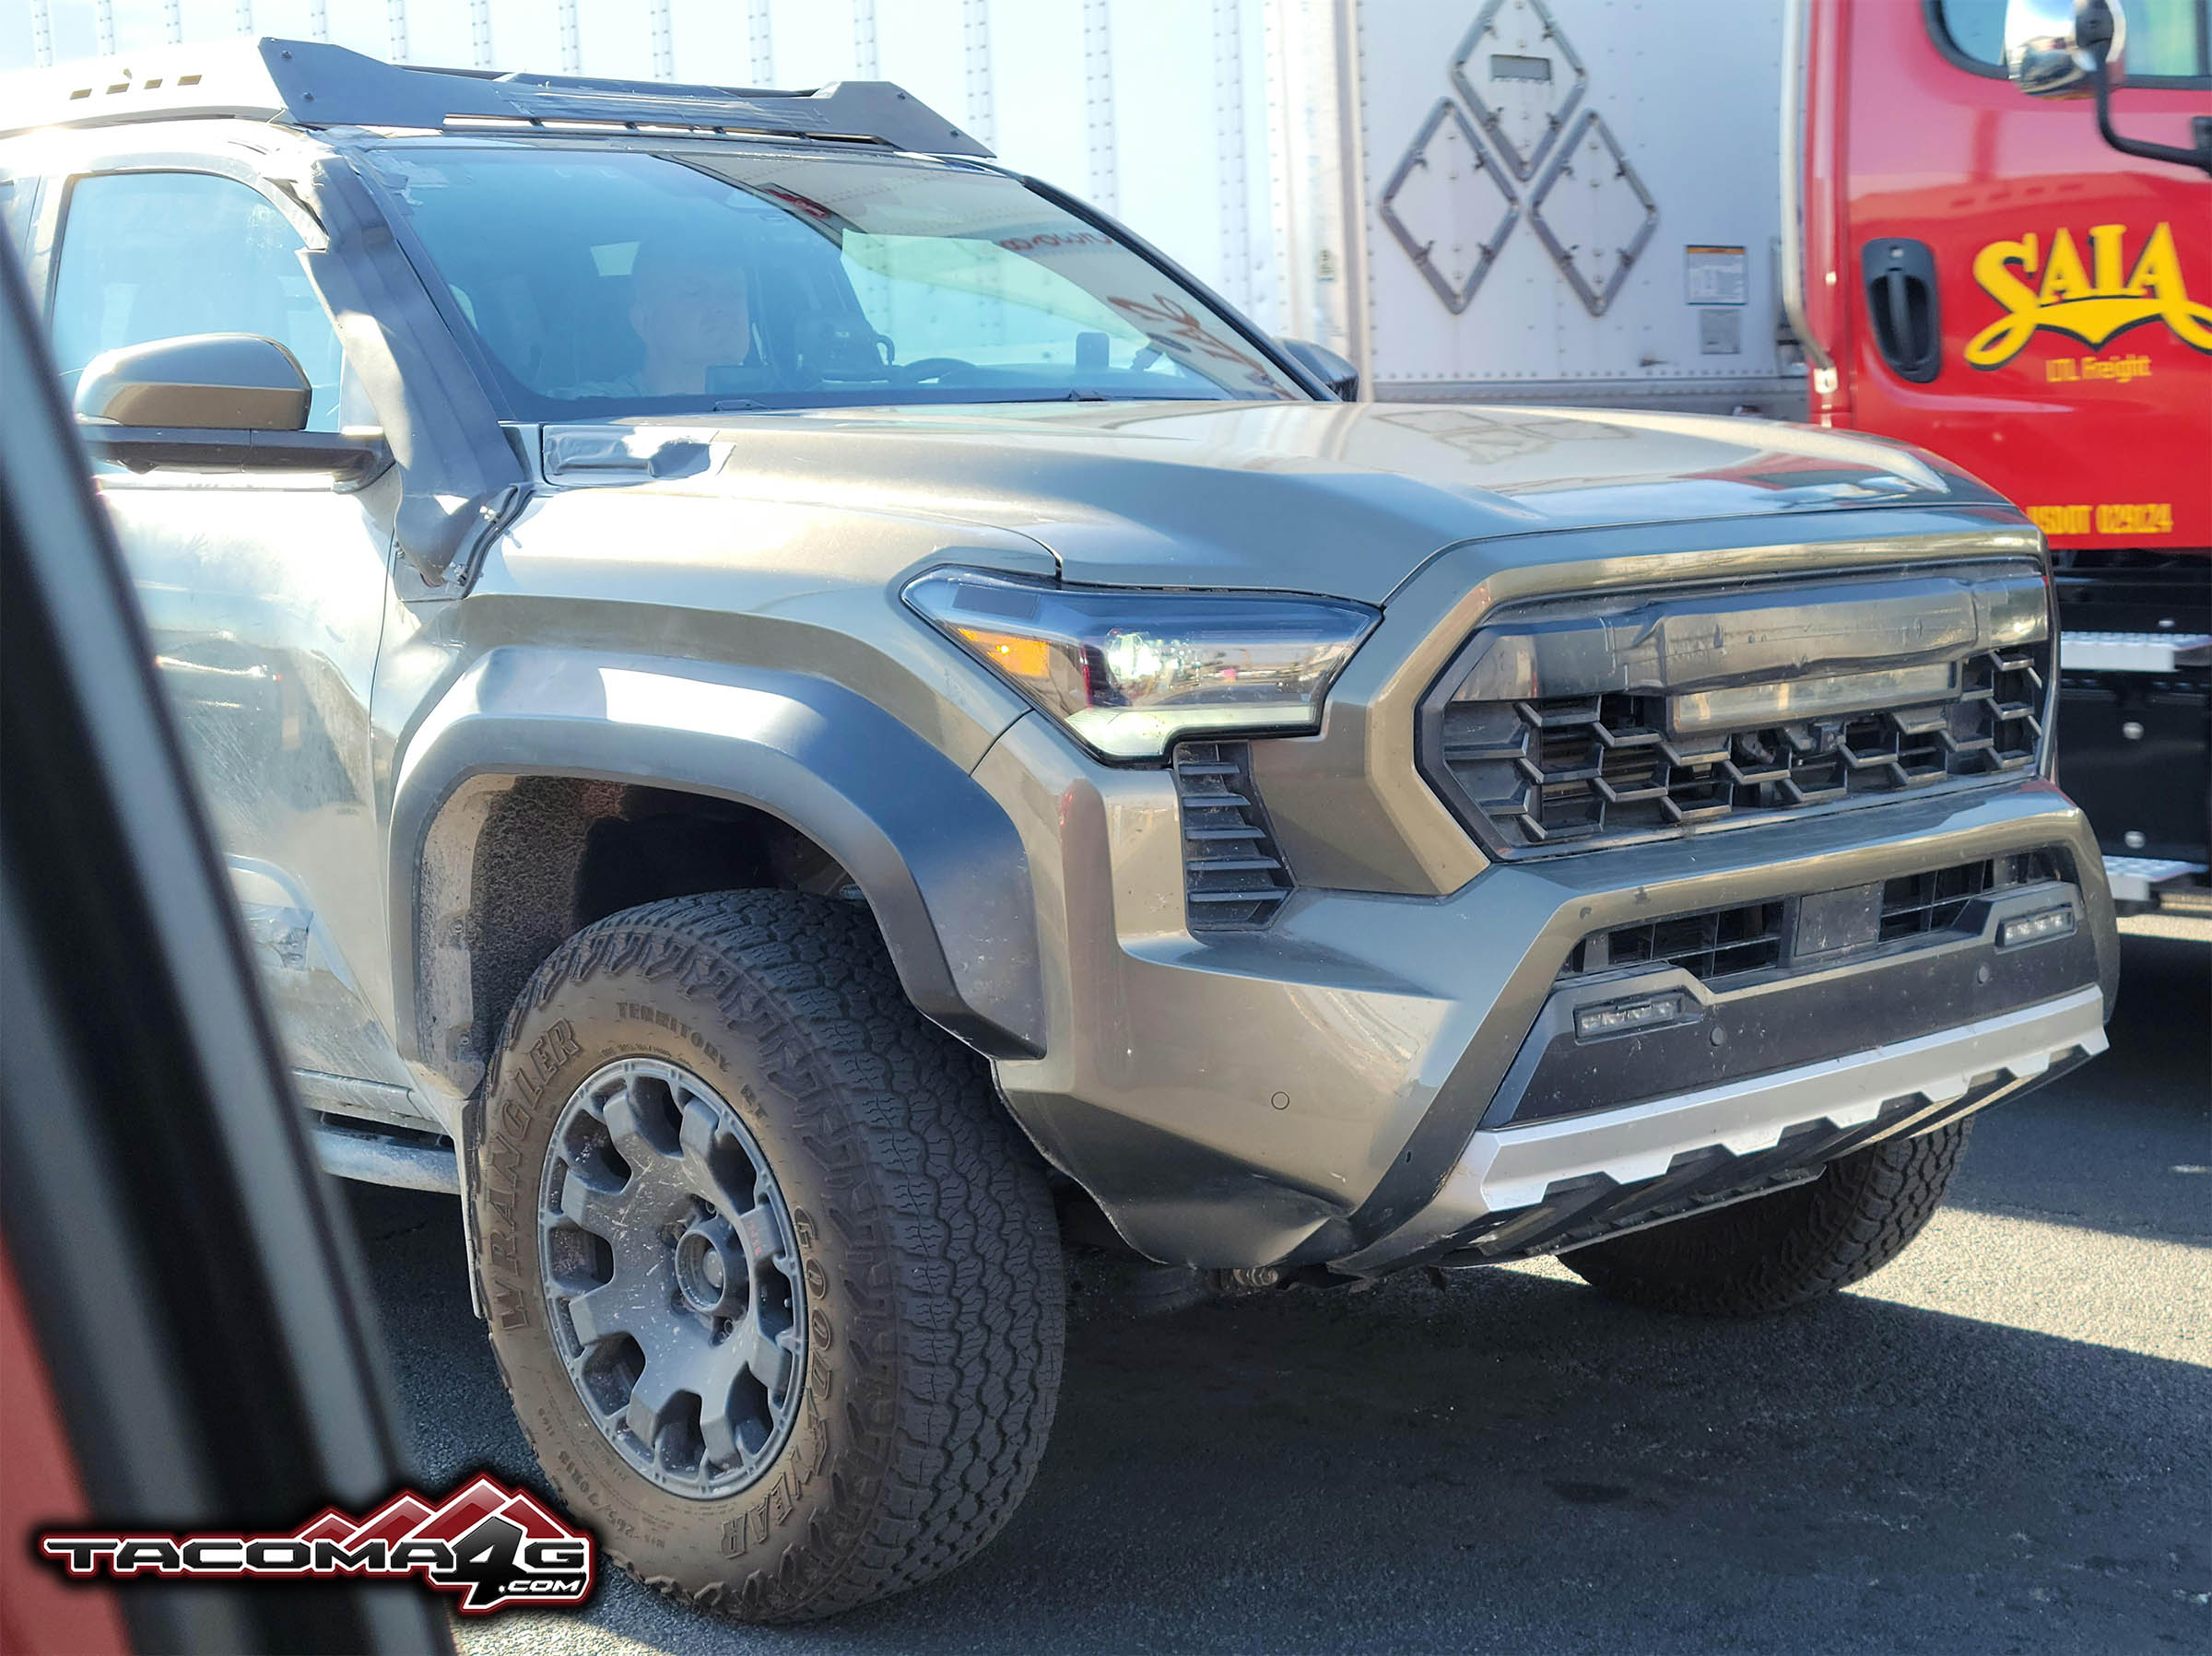 2024 Tacoma Offroaded Tacoma Trailhunter spotted on road with damaged snorkel 2024 Tacoma Trailhunter offroading spotted 2